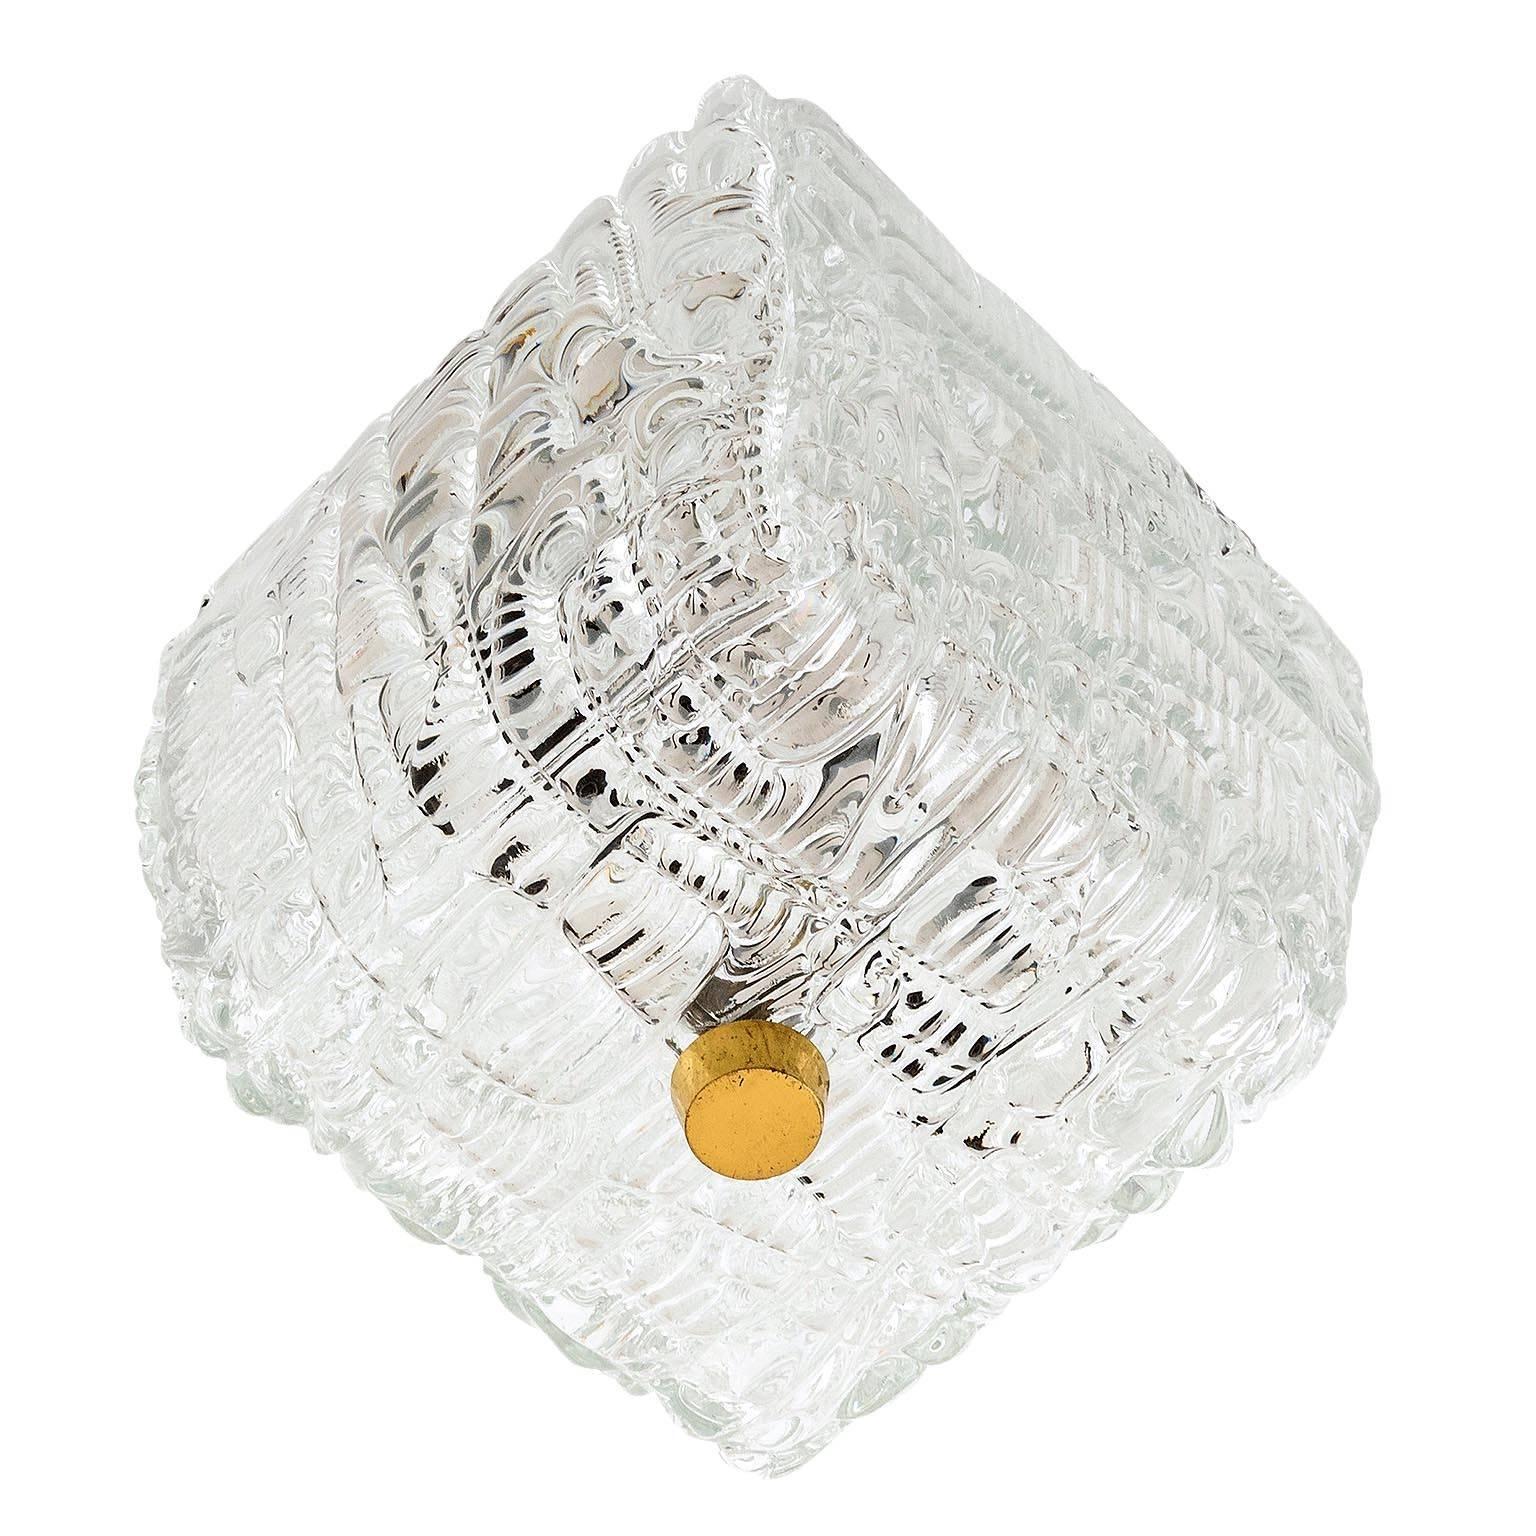 One of two flush mount light fixtures by Kalmar, Austria, manufactured in Mid-Century, circa 1960 (late 1950s or early 1960s). 
A textured clear glass is mounted with a brass knob to a backplate. 
The lamp has two sockets for small screw base LEDs